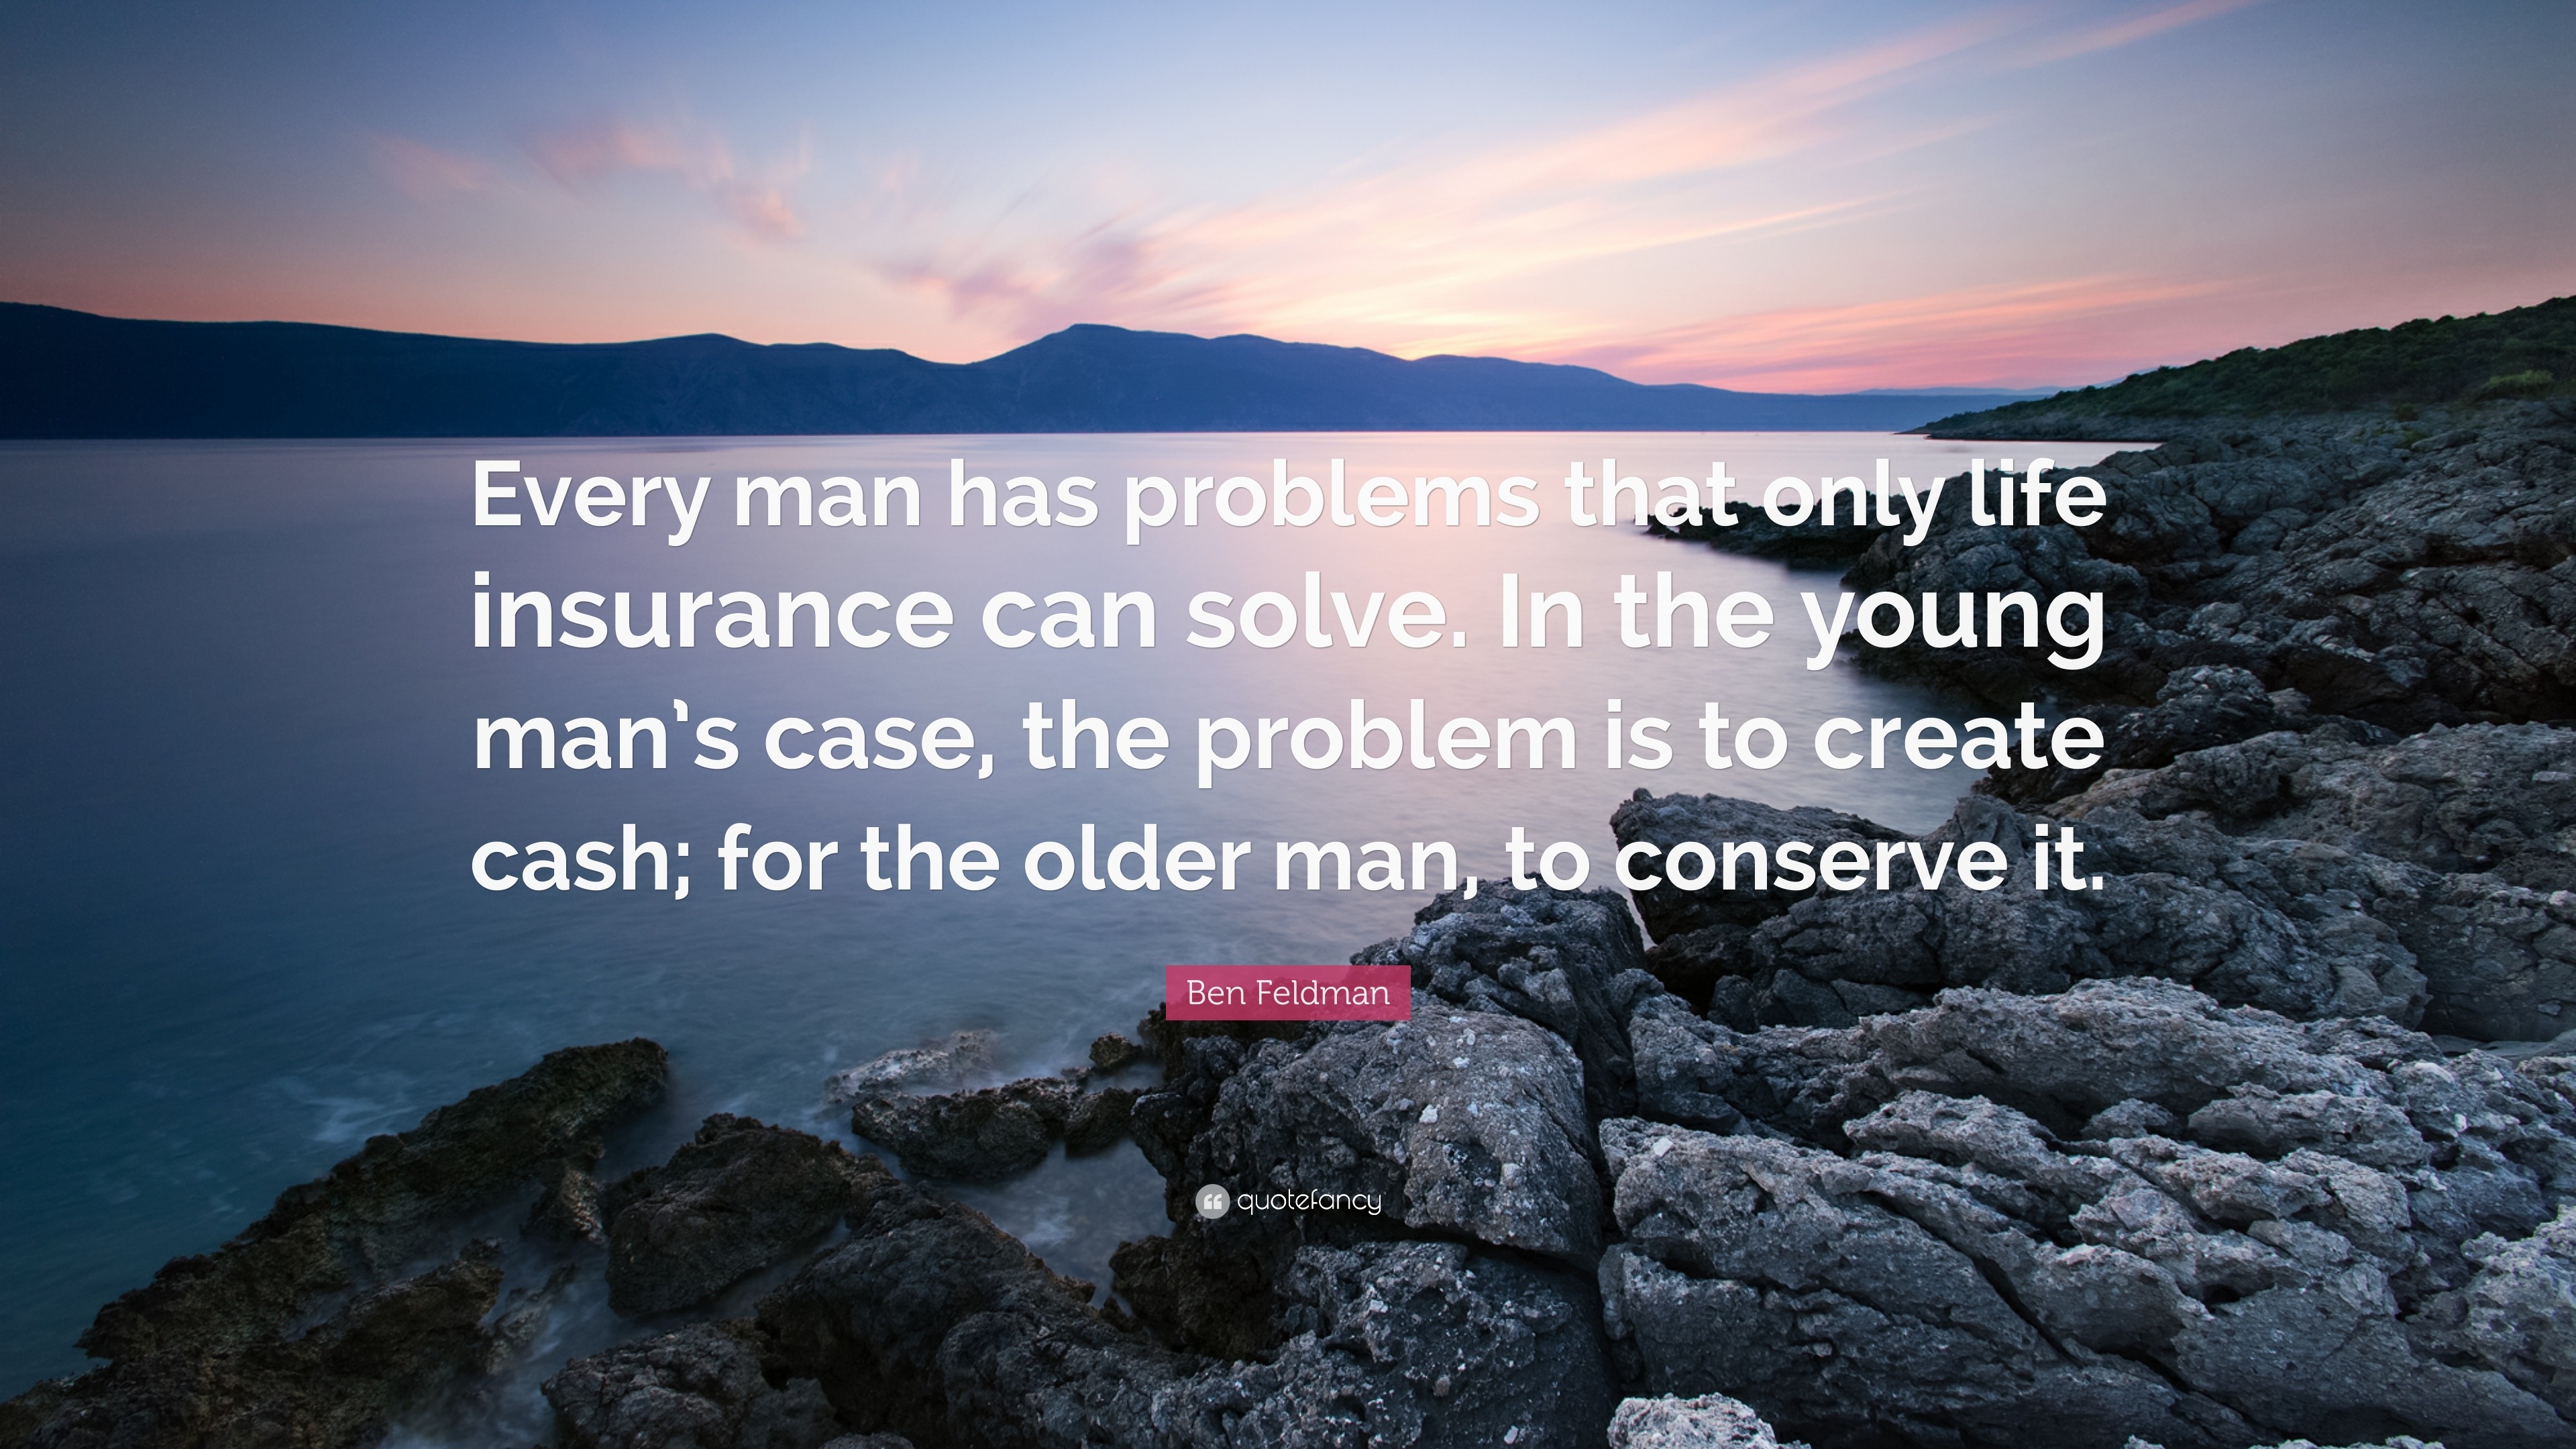 Ben Feldman Quote “Every man has problems that only life insurance can solve